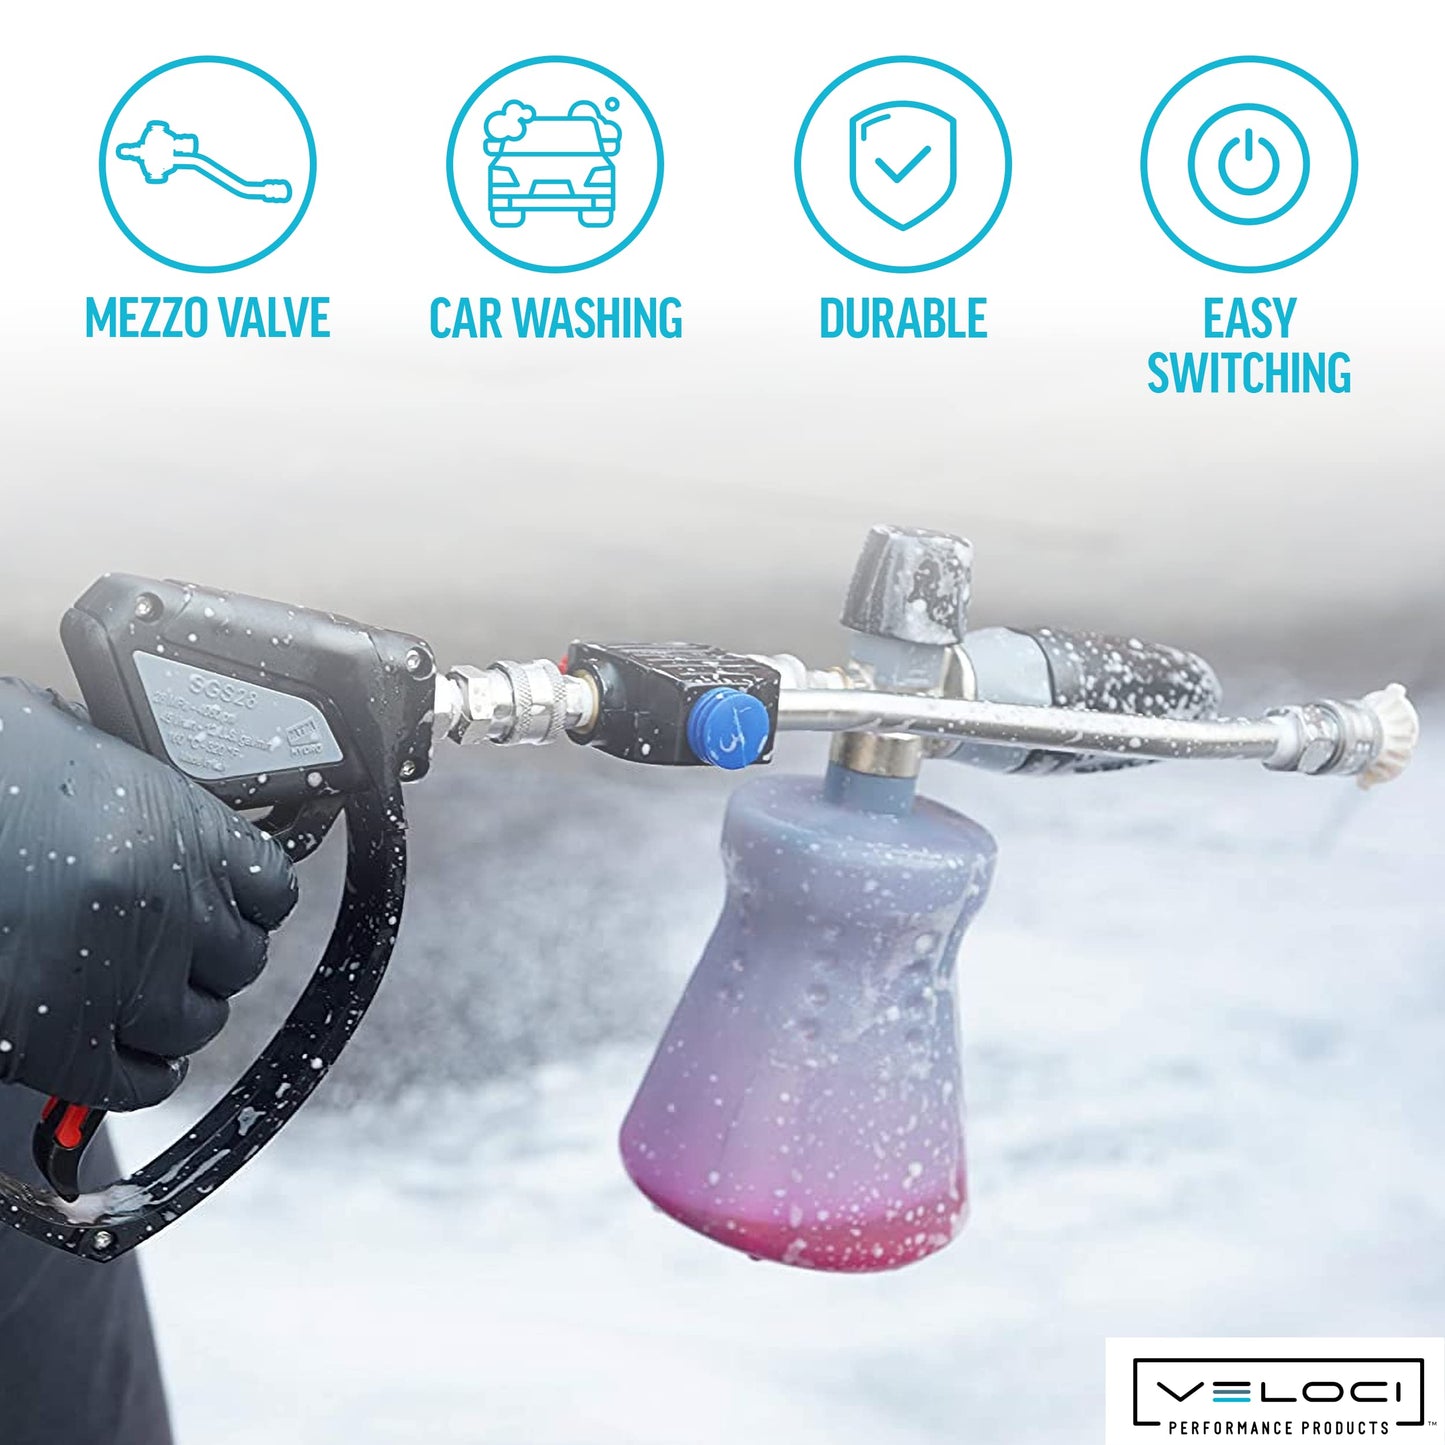 MTM Hydro Pressure Washer and Foam Cannon Extension Wand, High Pressure Foam Sprayer 3700 PSI for Car Wash and Detailing, Pressure Washer Accessories